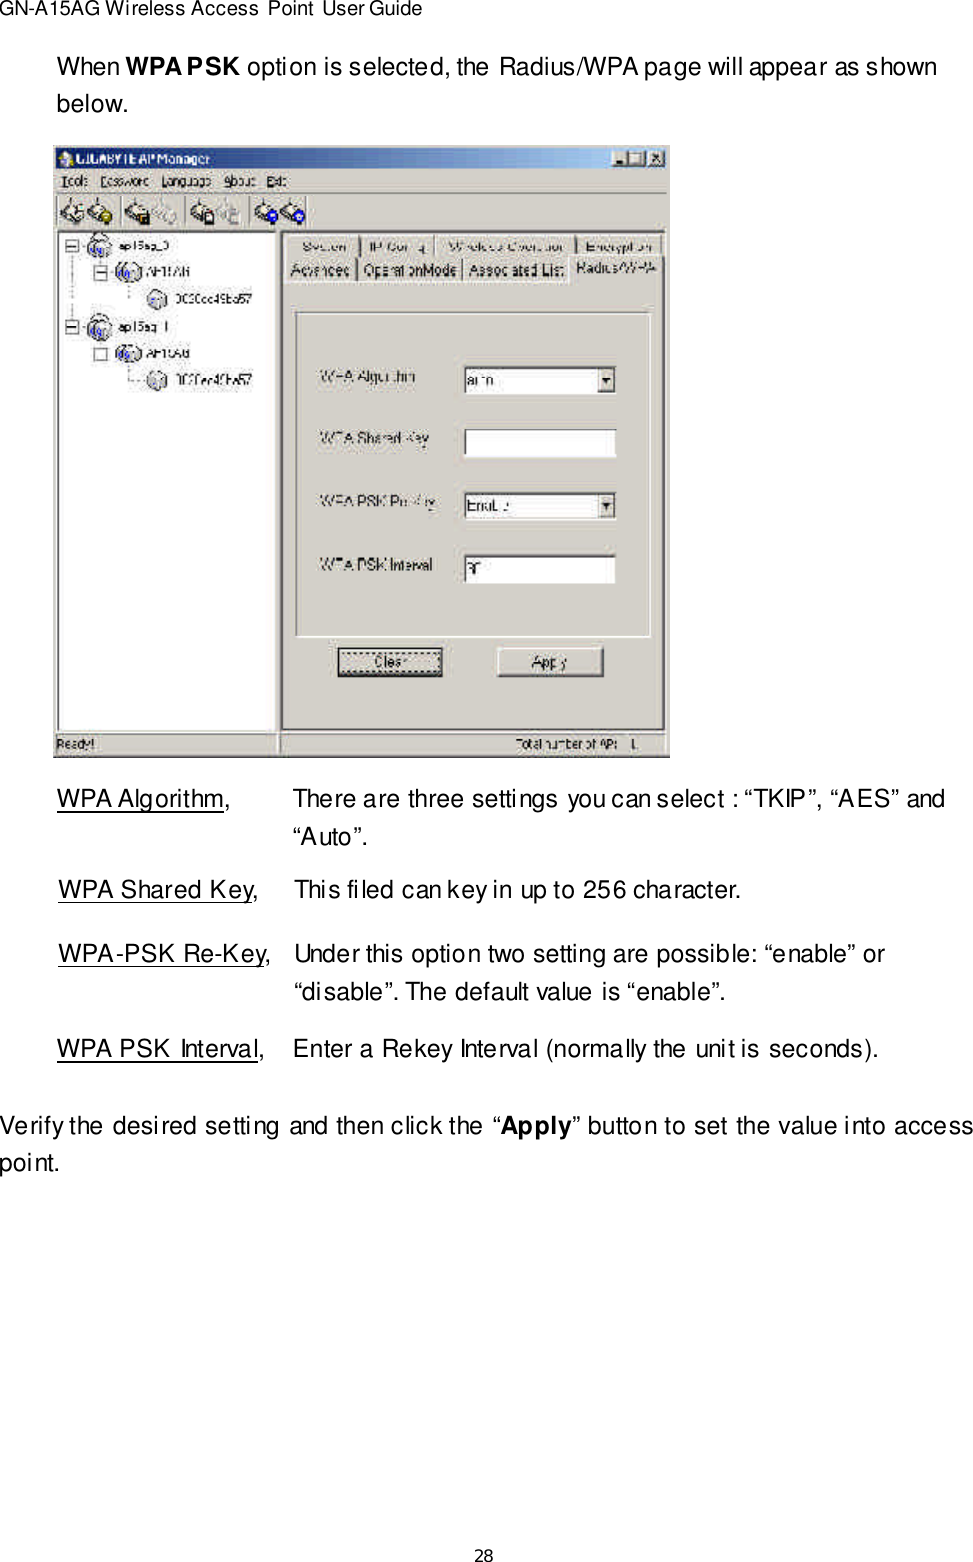 28GN-A15AG Wireless Access Point User GuideWhen WPA PSK option is selected, the Radius/WPA page will appear as shownbelow.WPA Algorithm,There are three settings you can select : “TKIP”, “AES” and“Auto”.WPA Shared Key,This filed can key in up to 256 character.WPA-PSK Re-Key,Under this option two setting are possible: “enable” or“disable”. The default value is “enable”.WPA PSK Interval,Enter a Rekey Interval (normally the unit is seconds).Verify the desired setting and then click the “Apply” button to set the value into accesspoint.